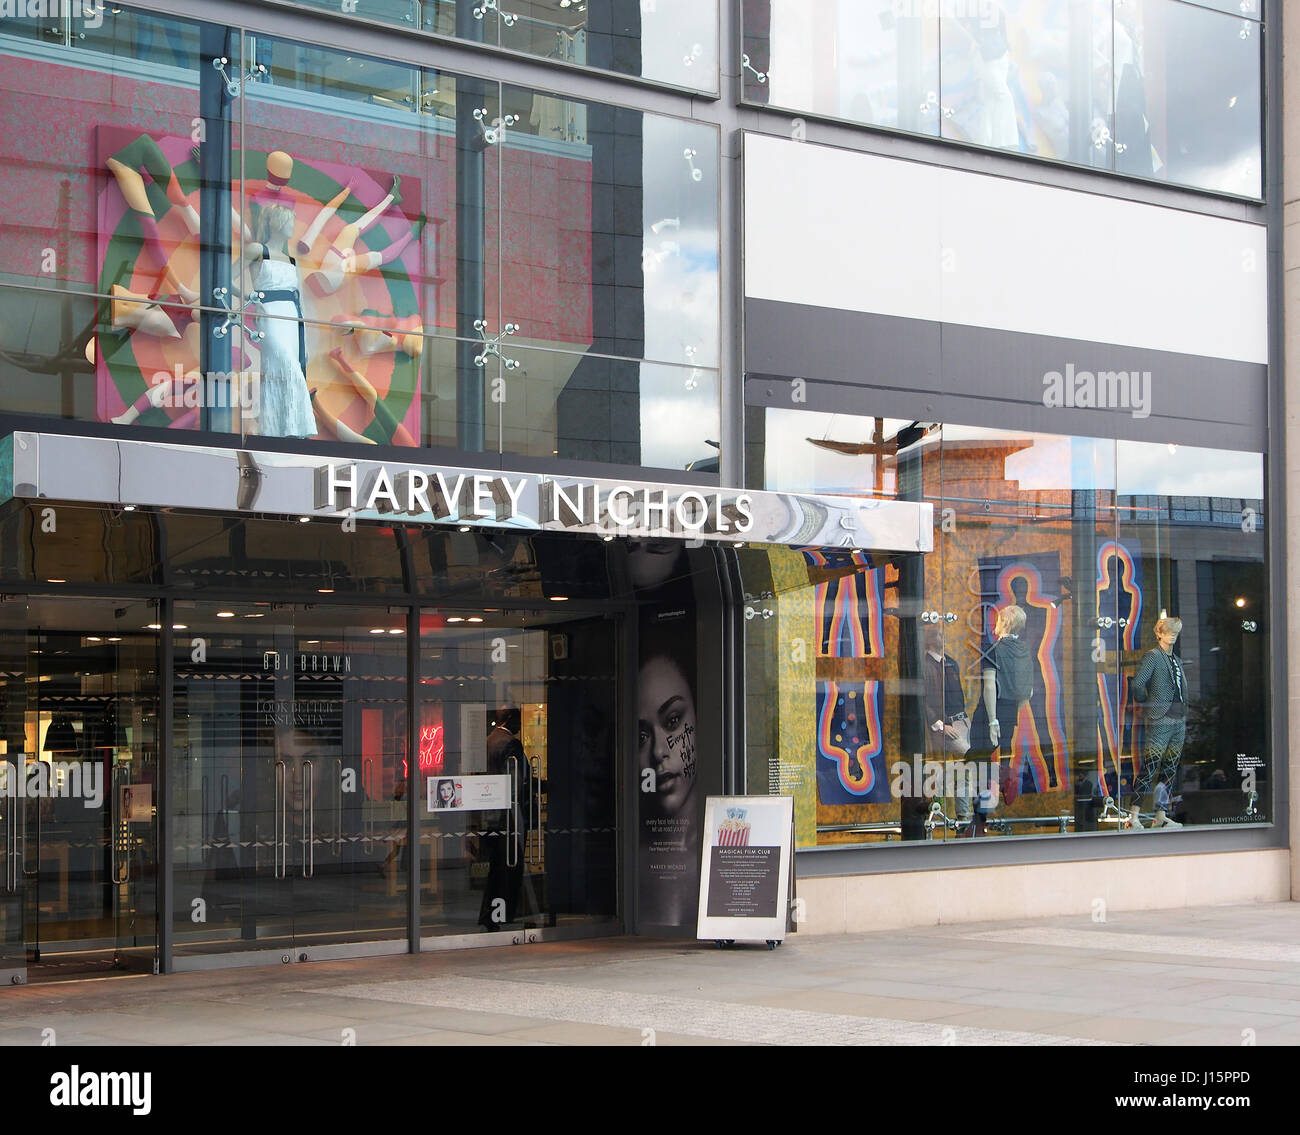 Exterior of the Harvey Nichols shop store in the city centre center of Manchester, England, UK, showing the colourful colorful window displays. Stock Photo